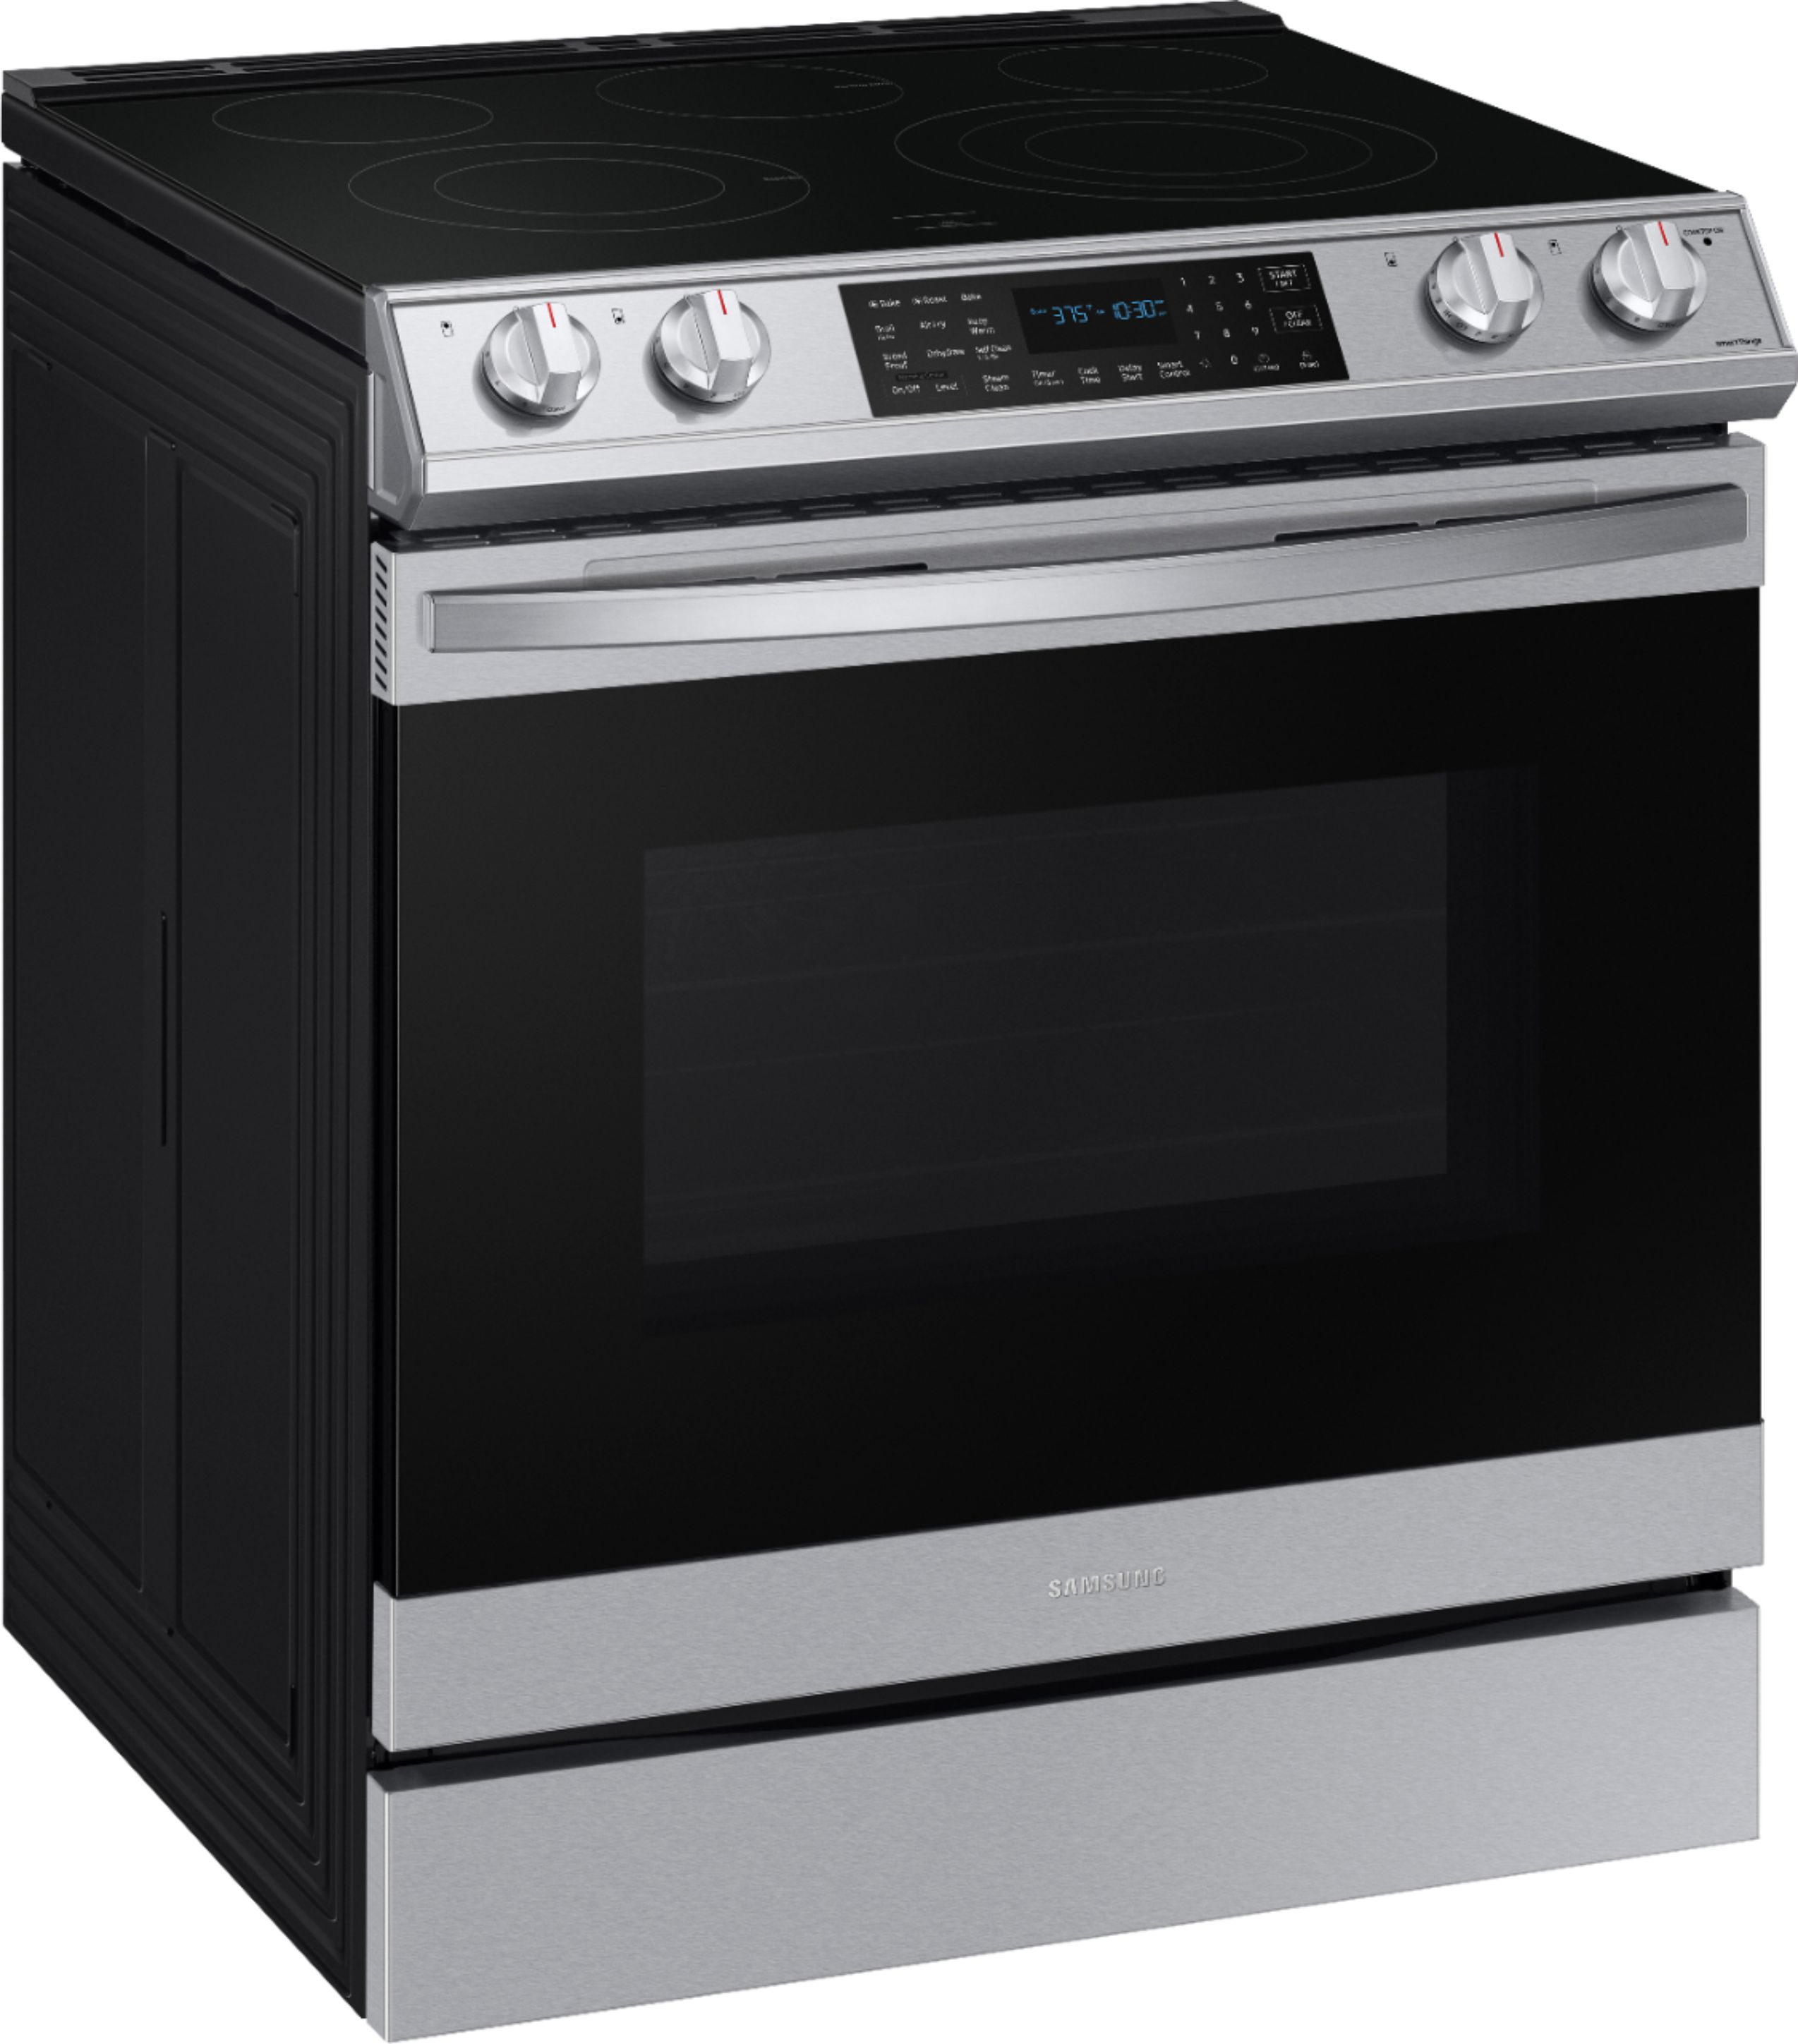 Angle View: KitchenAid - 6.7 Cu. Ft. Self-Cleaning Freestanding Double Oven Electric Convection Range - White